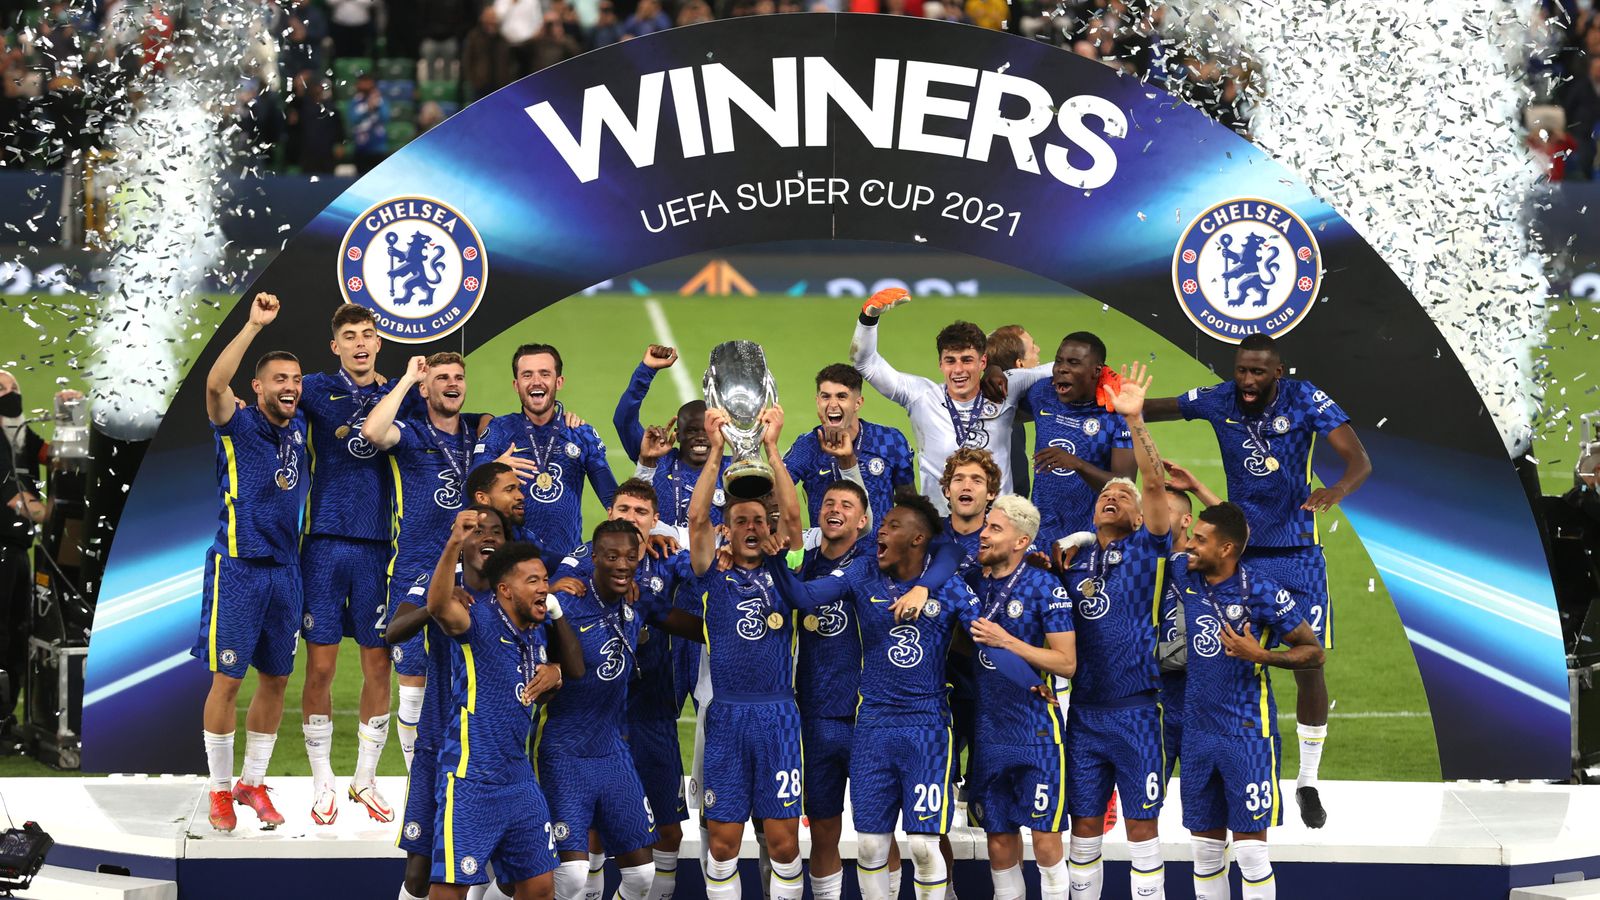 Chelsea won the UEFA Super Cup on penalties against Villareal, HOTPEN